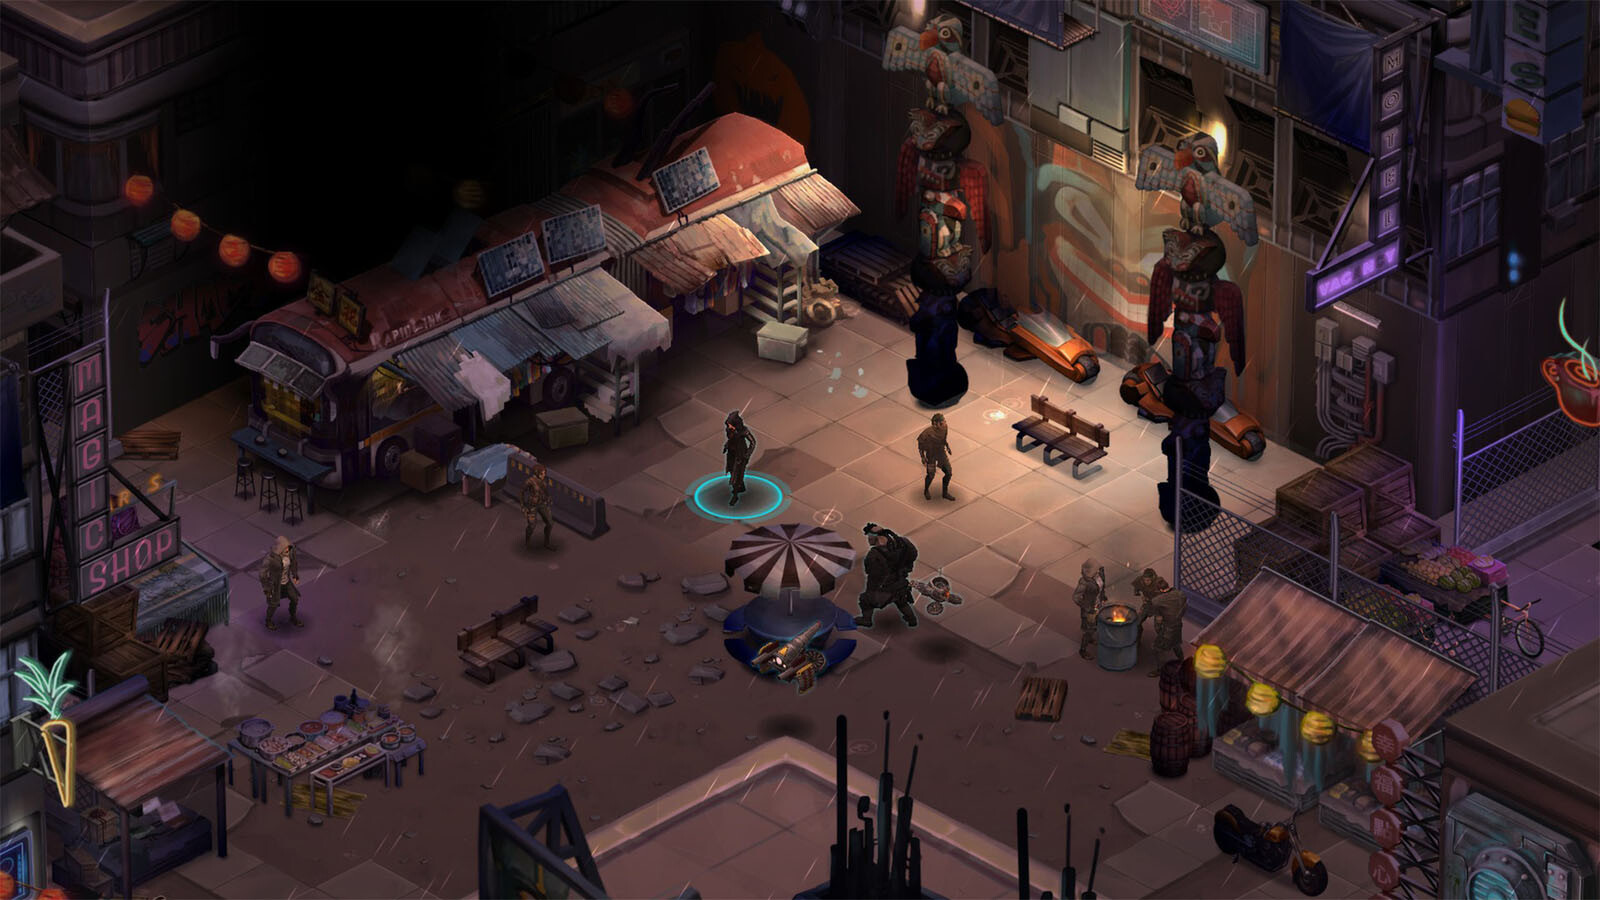 Shadowrun Trilogy Deluxe on Steam